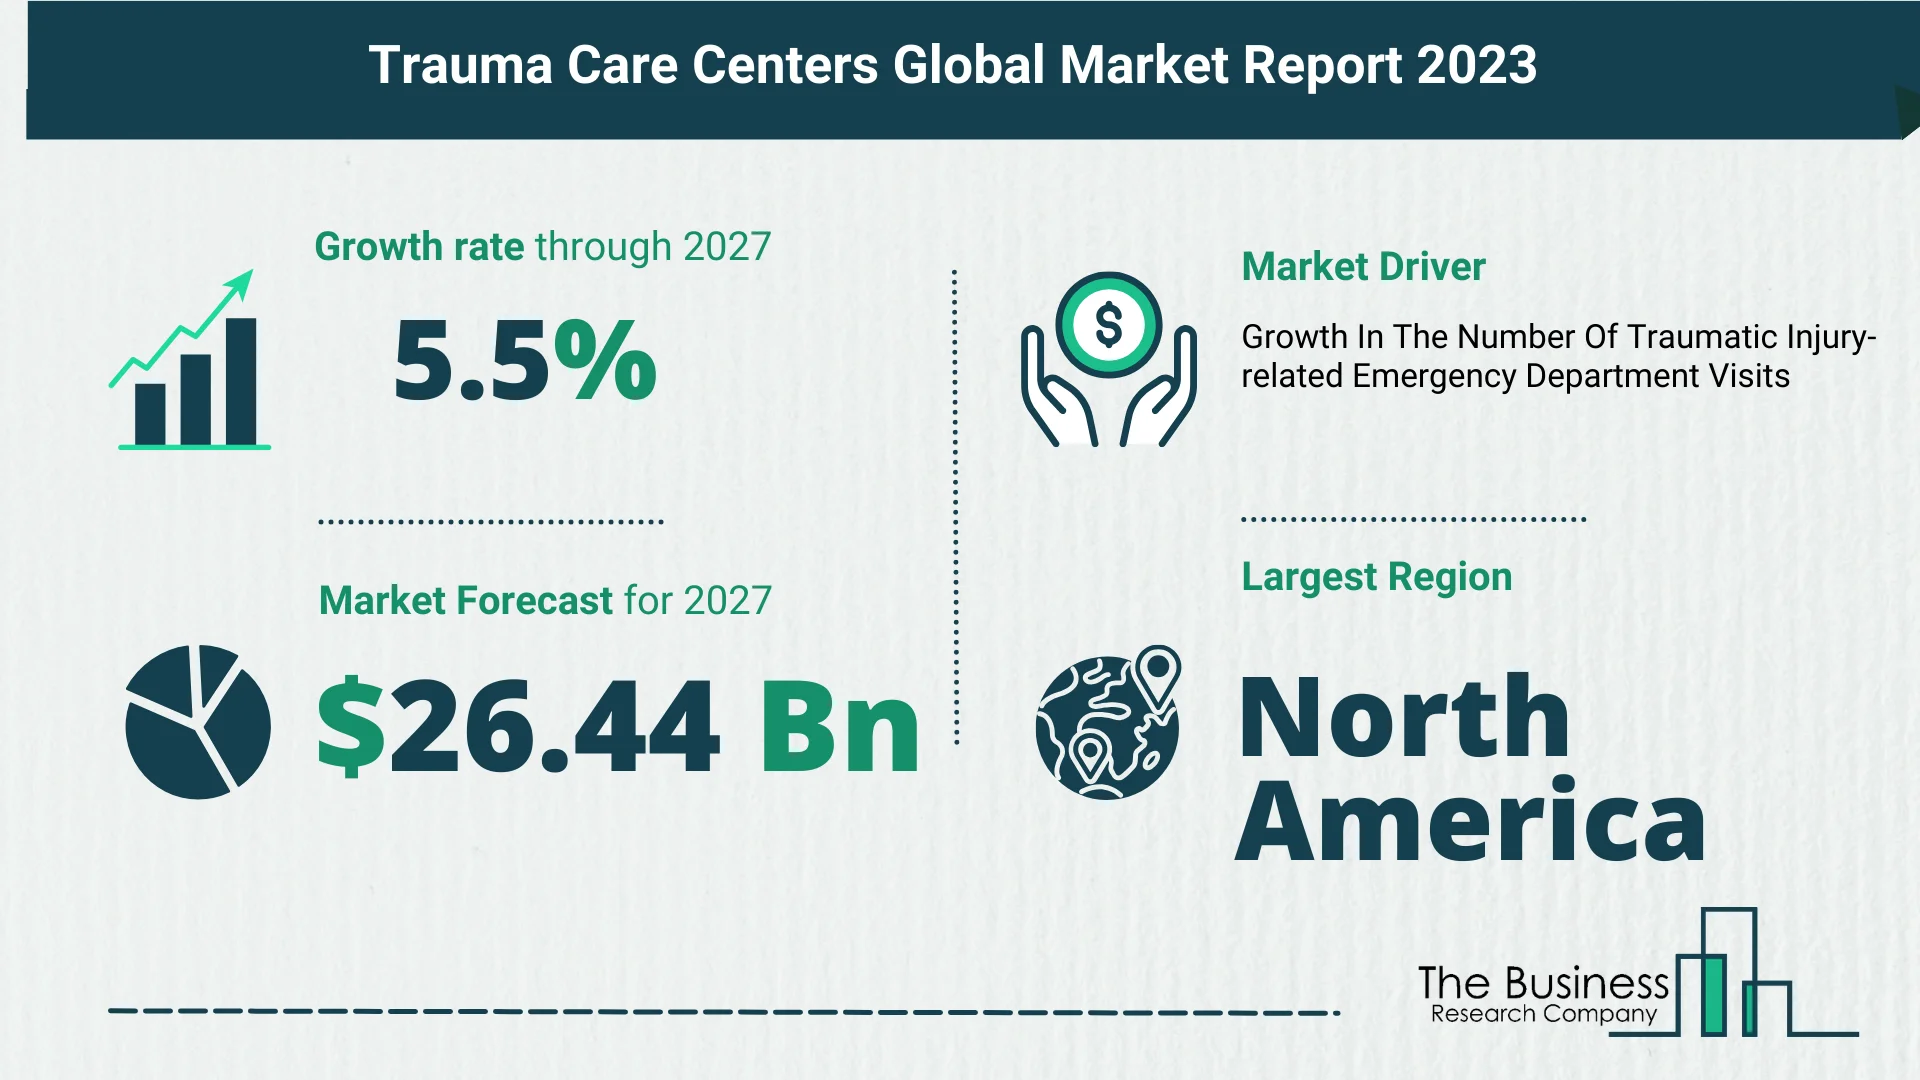 Top 5 Insights From The Trauma Care Centers Market Report 2023